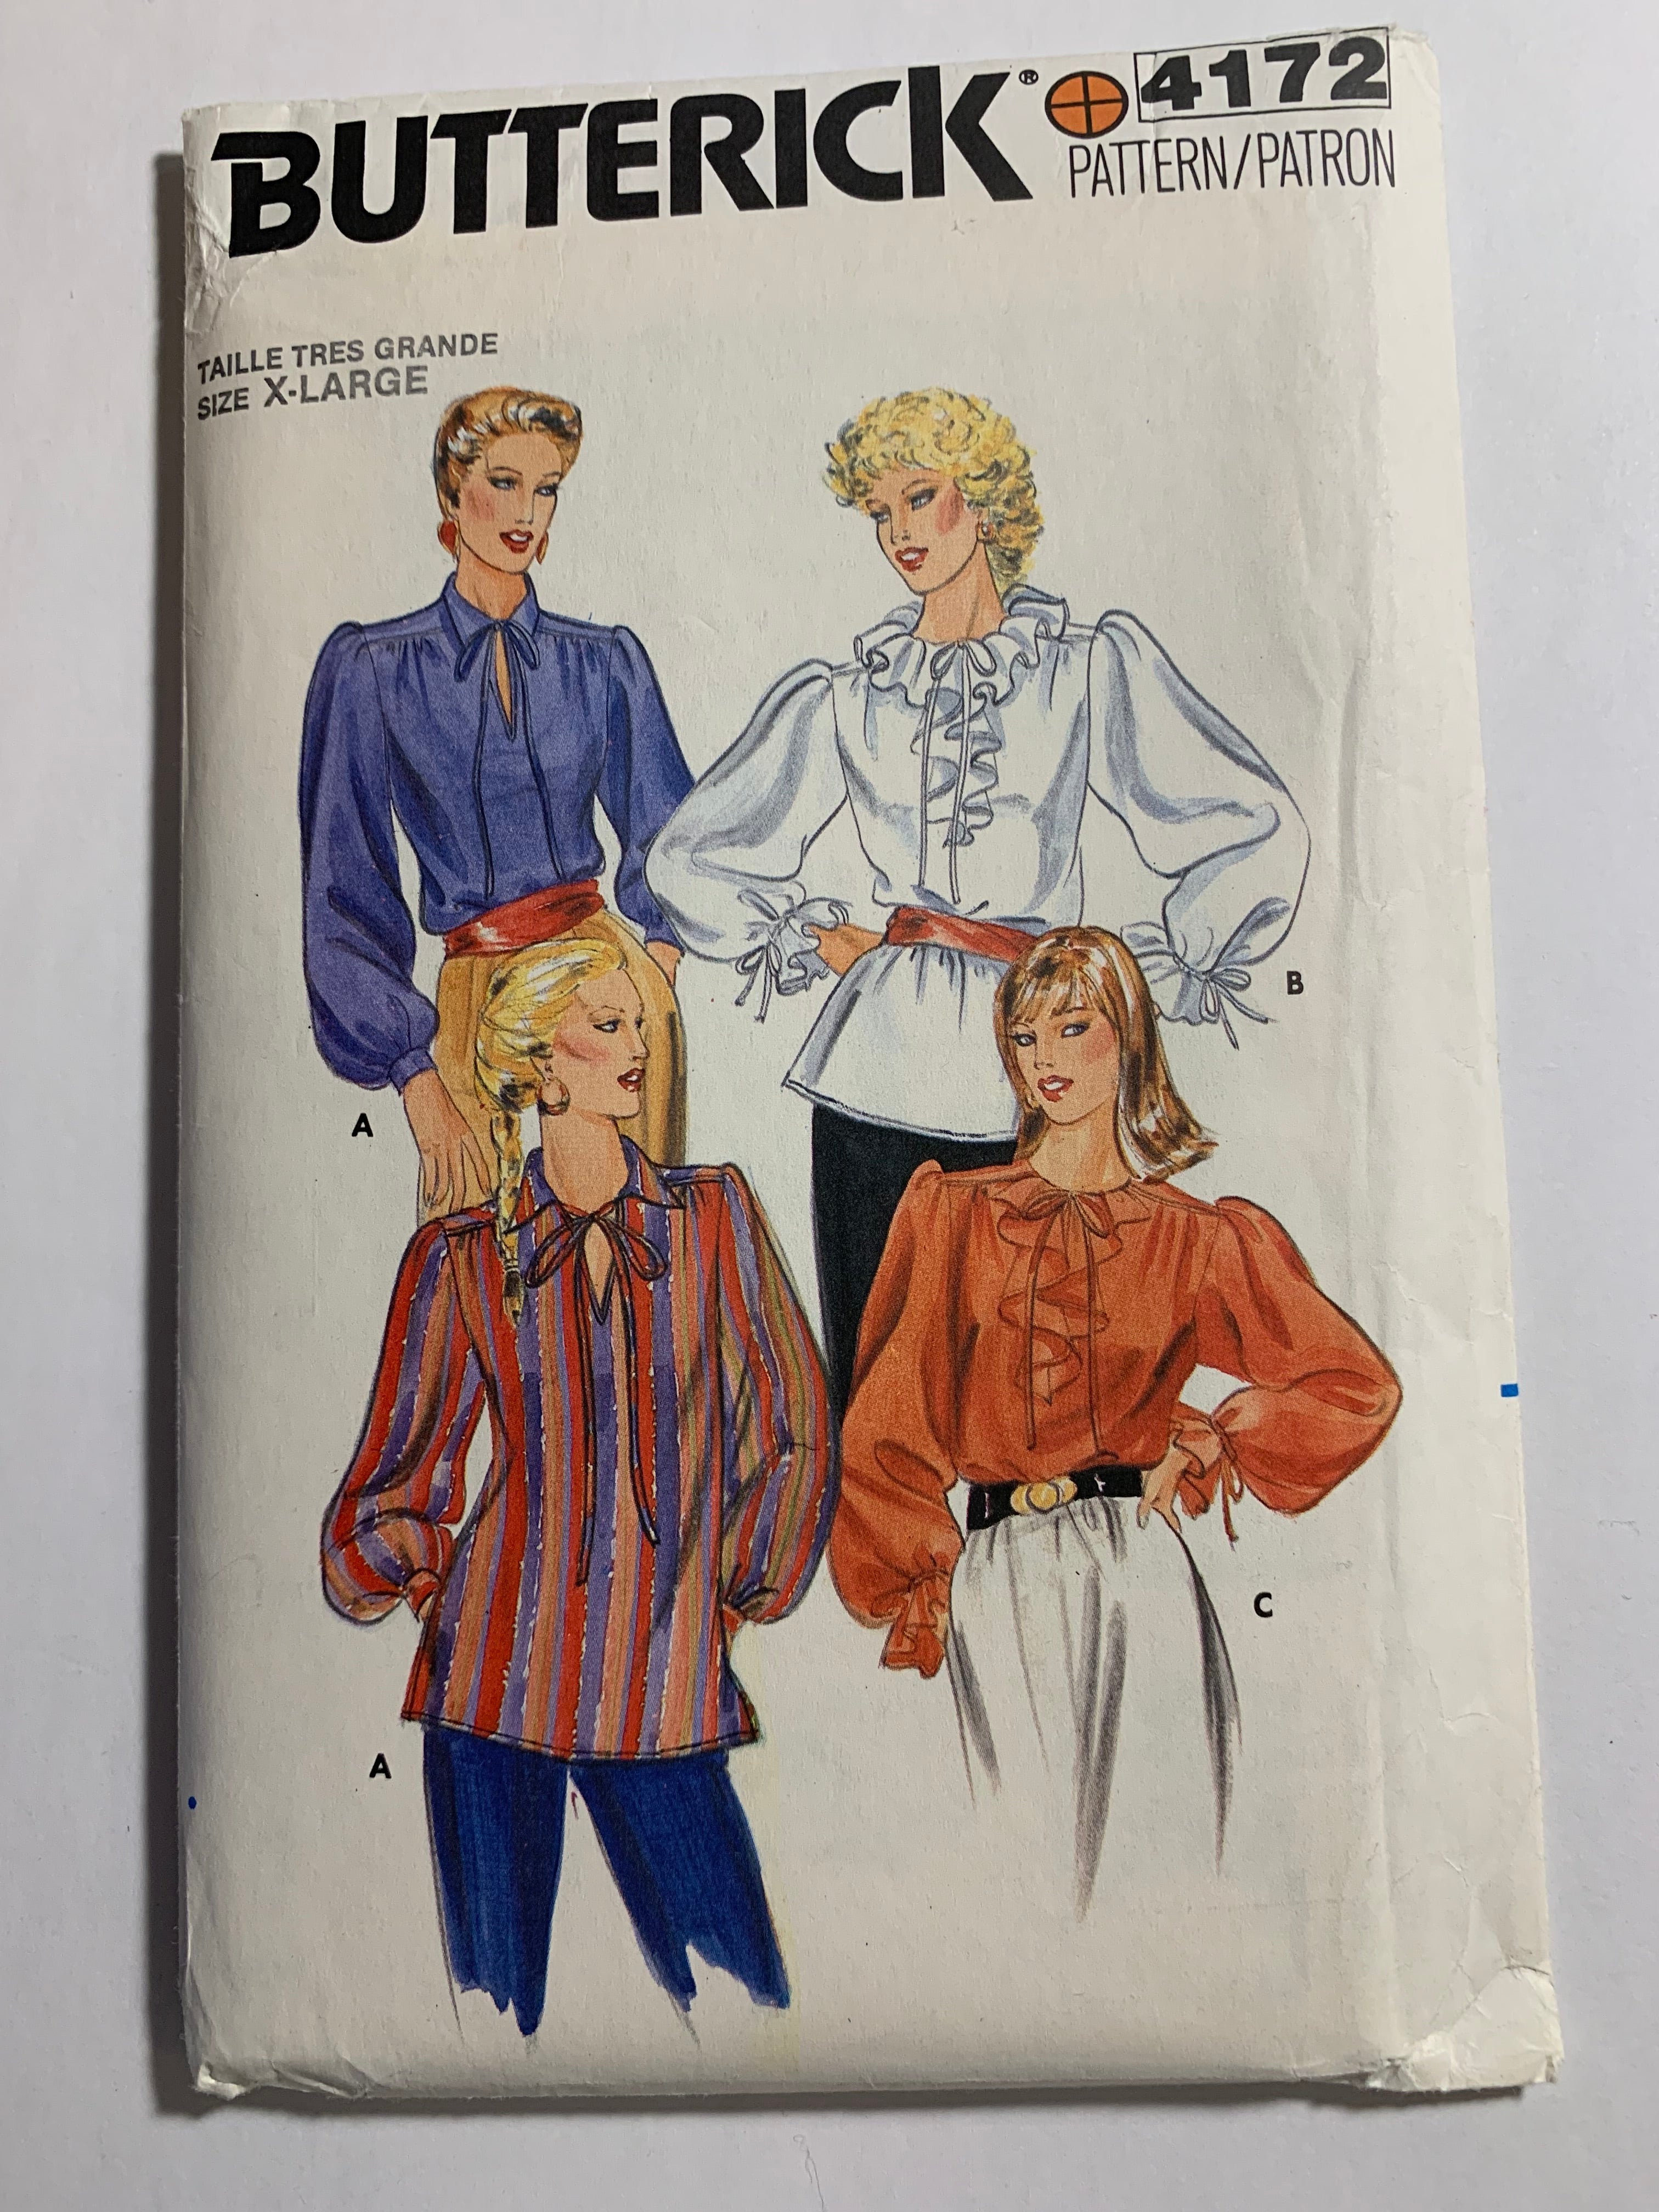  Butterick 4396 Sewing Pattern Misses Full Figure Tops Size  16-22 Bust 38-44 : Arts, Crafts & Sewing